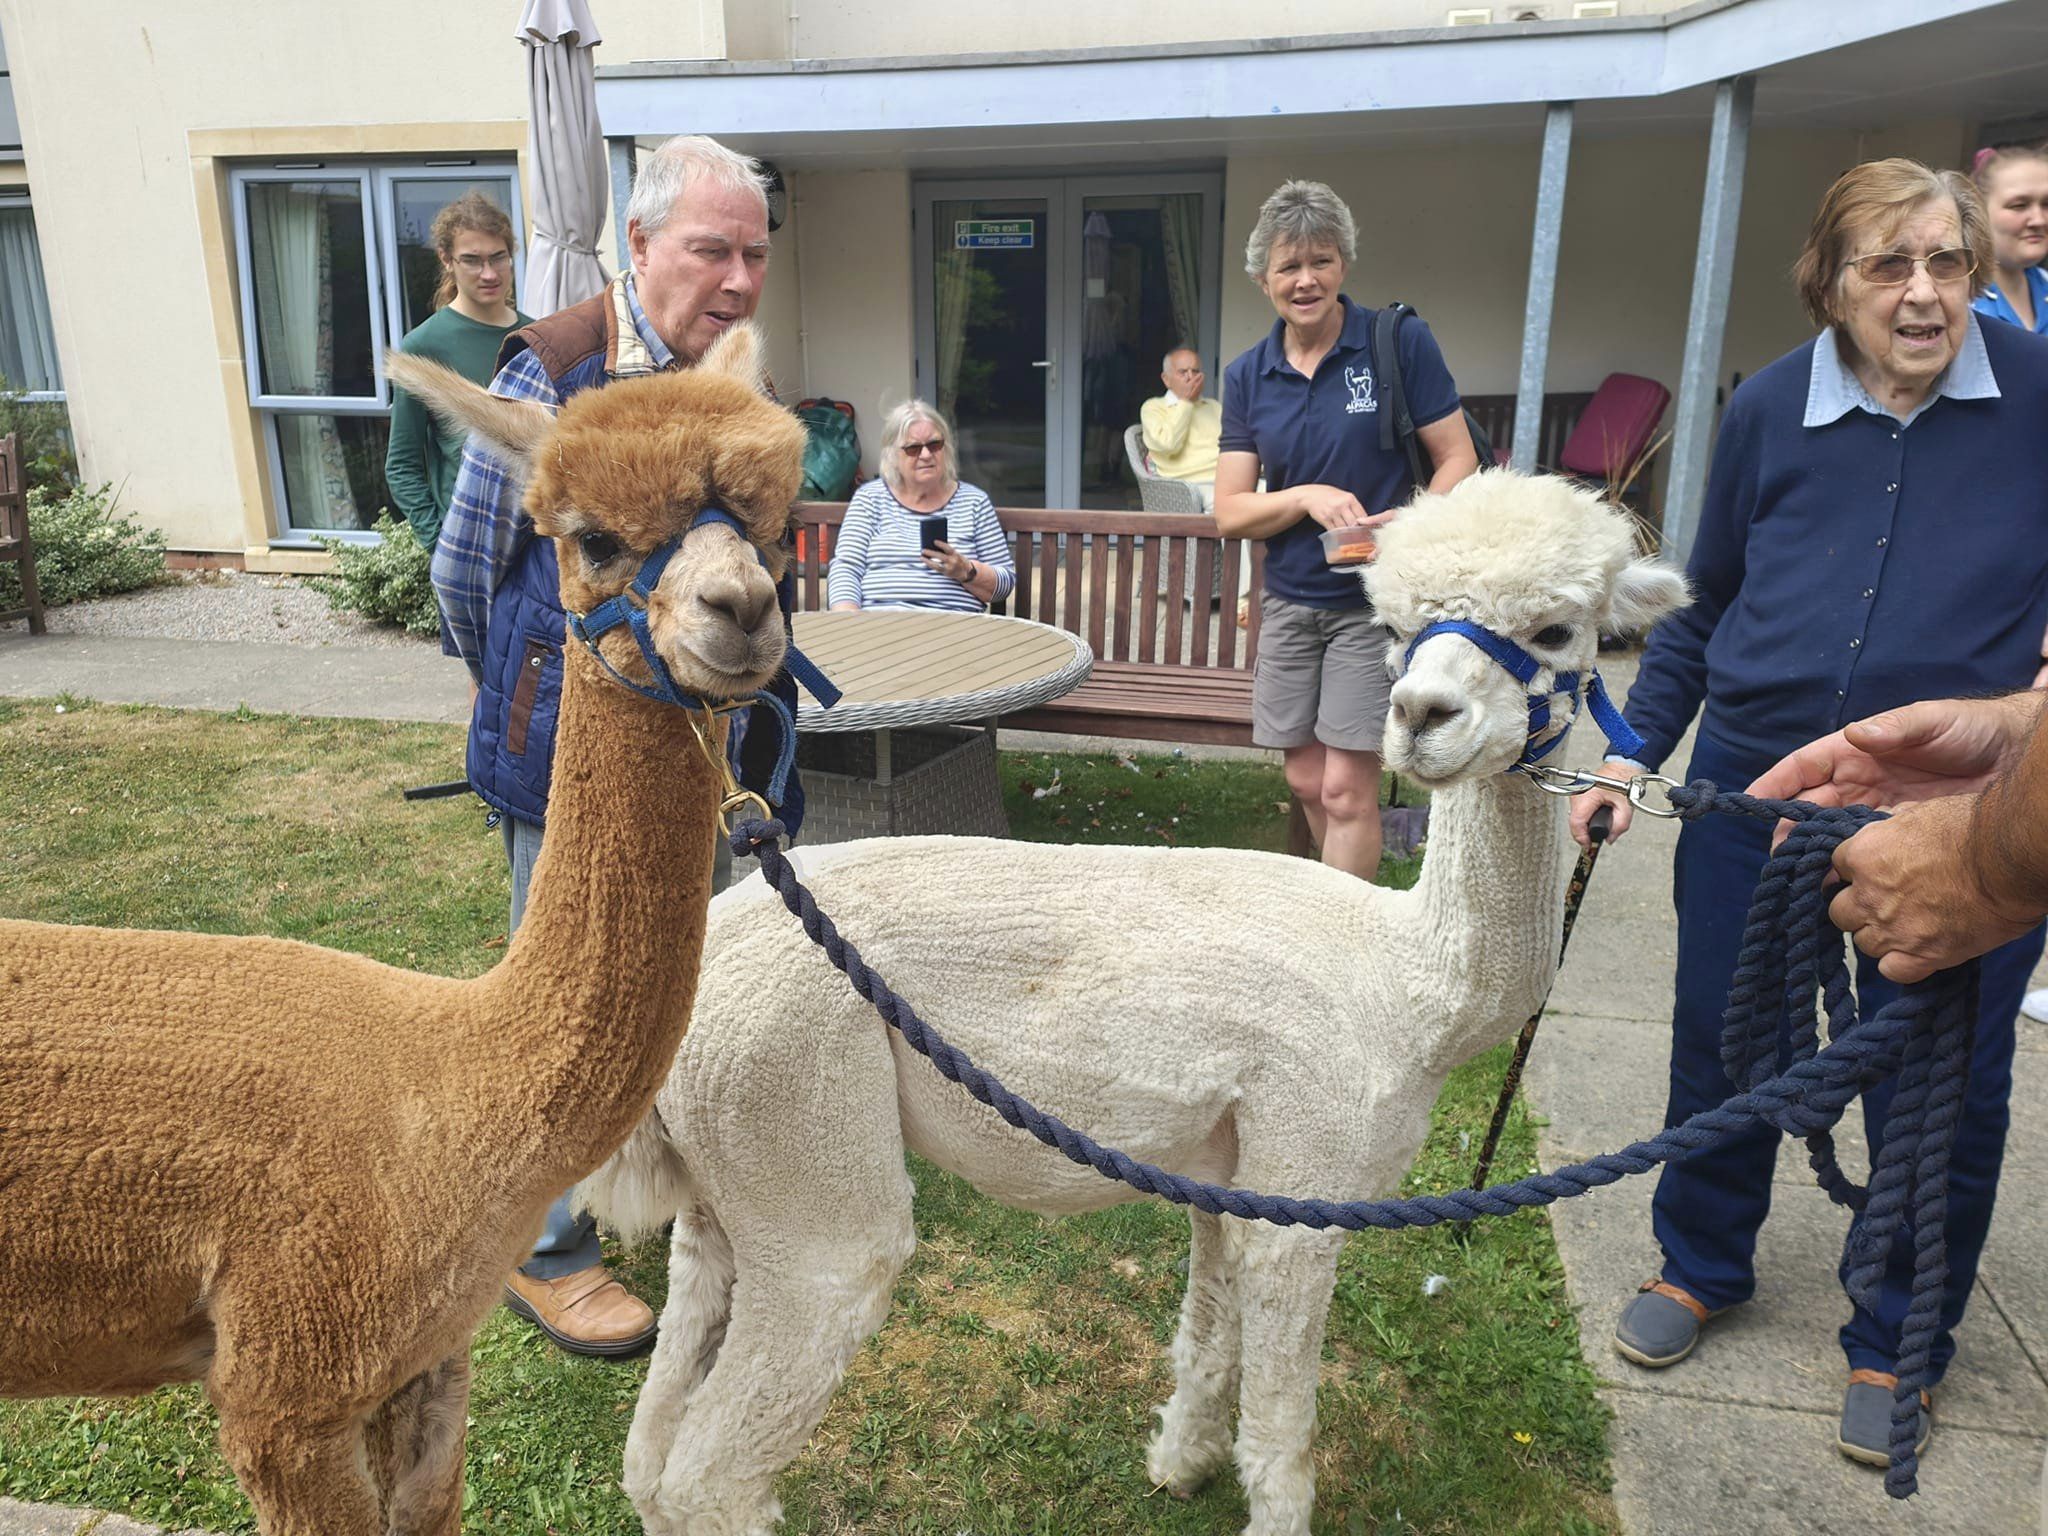 Lakemoor Alpaca Visit to Care Home residents